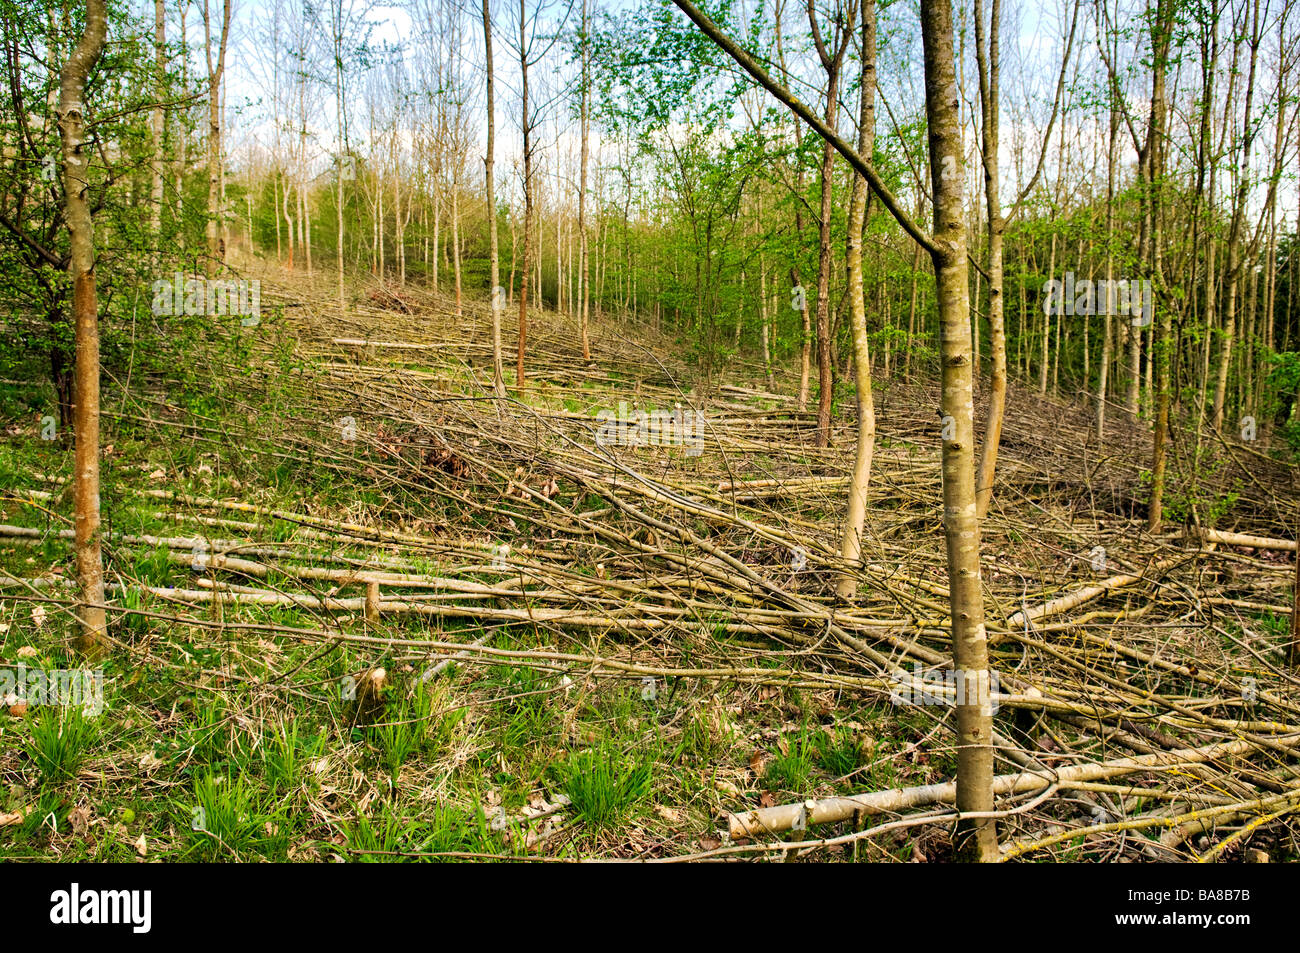 Young trees cut down under tree management in Overscourt wood area near Siston in Bristol on a bright sunlit day Stock Photo